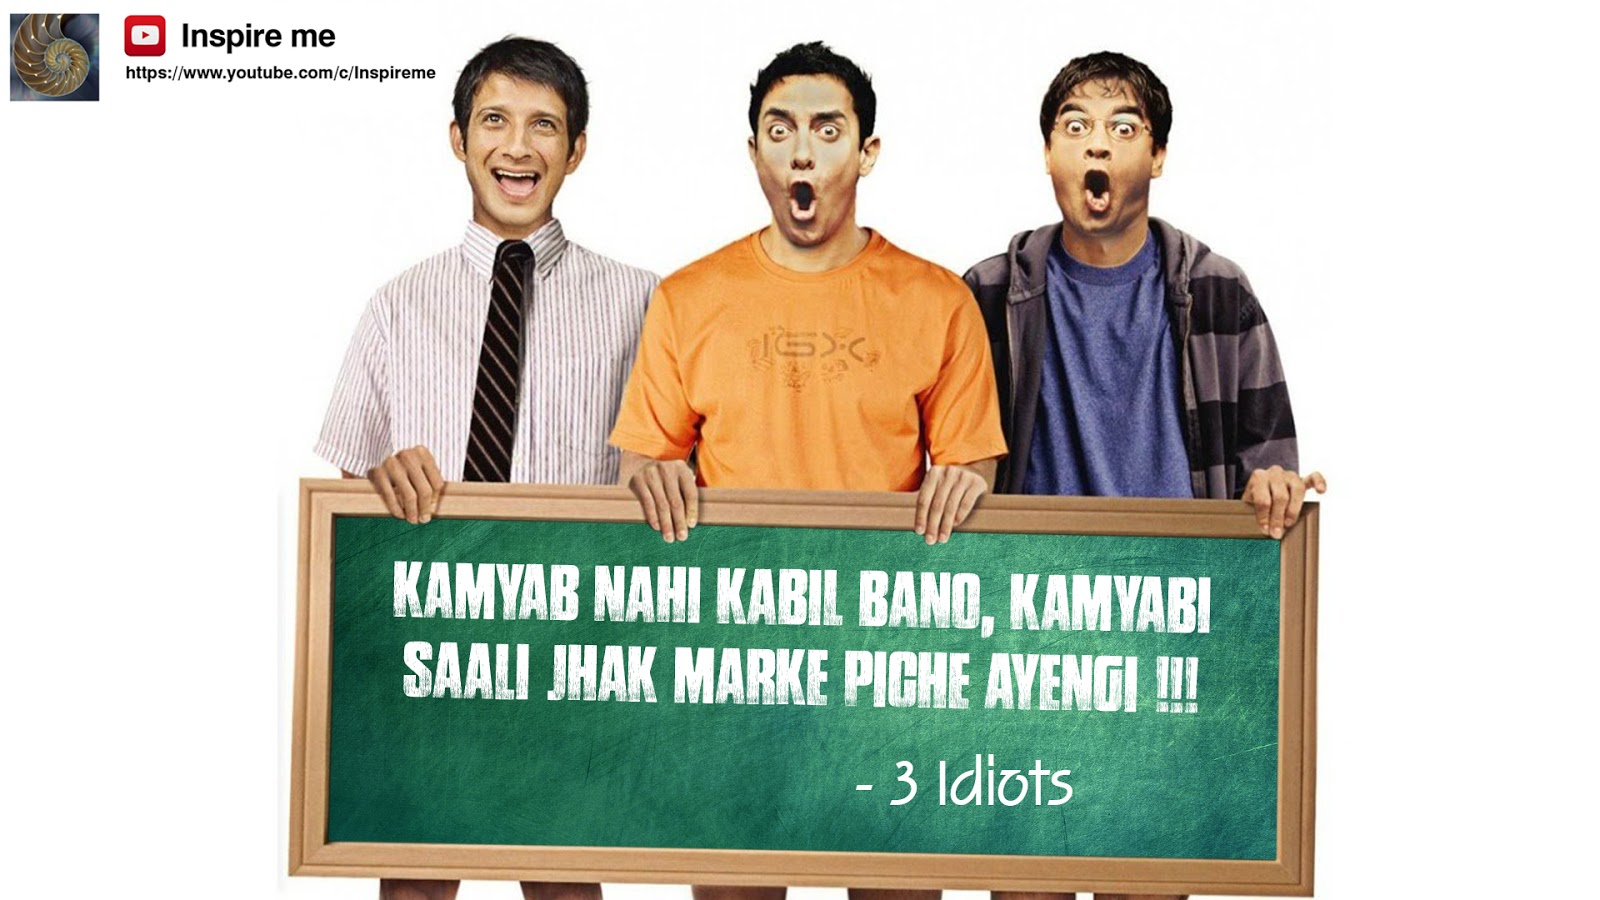 3 Idiots Quotes About Love With Inspire Me Bollywood - Kabil Bano Kamyabi Jhak Marke Piche Aayegi , HD Wallpaper & Backgrounds